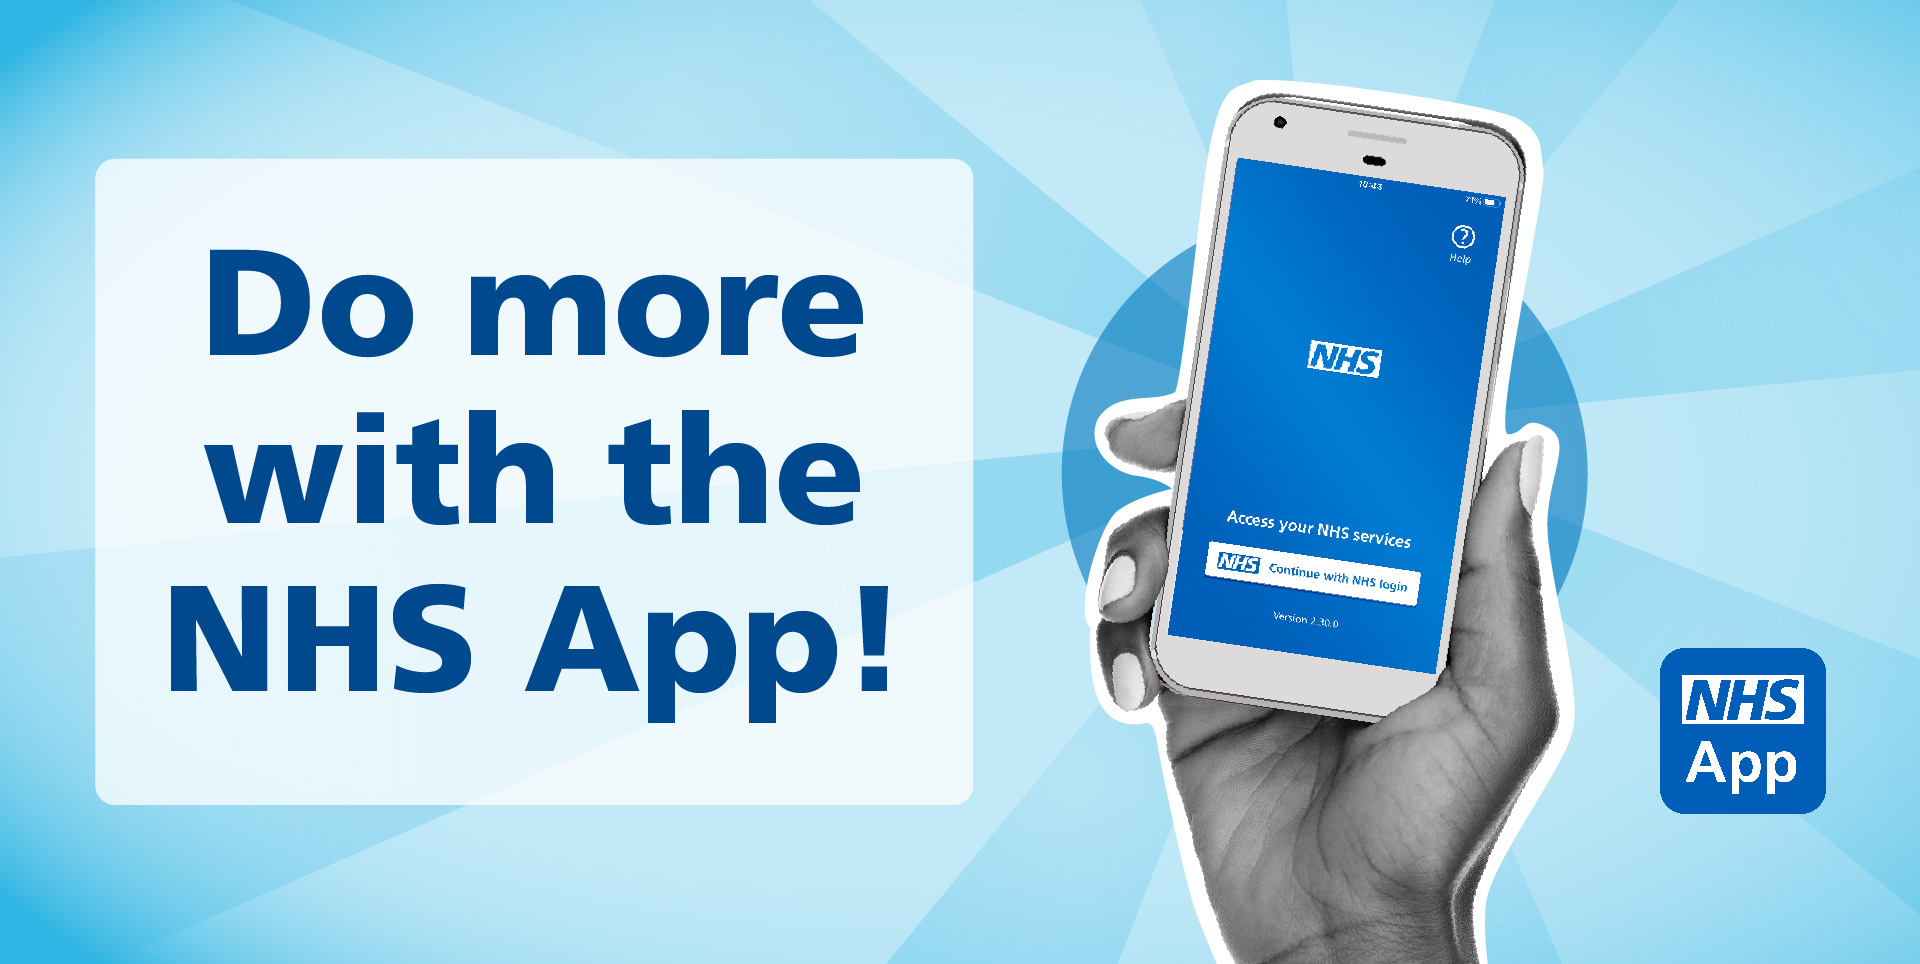 Download the NHS App to access NHS services online